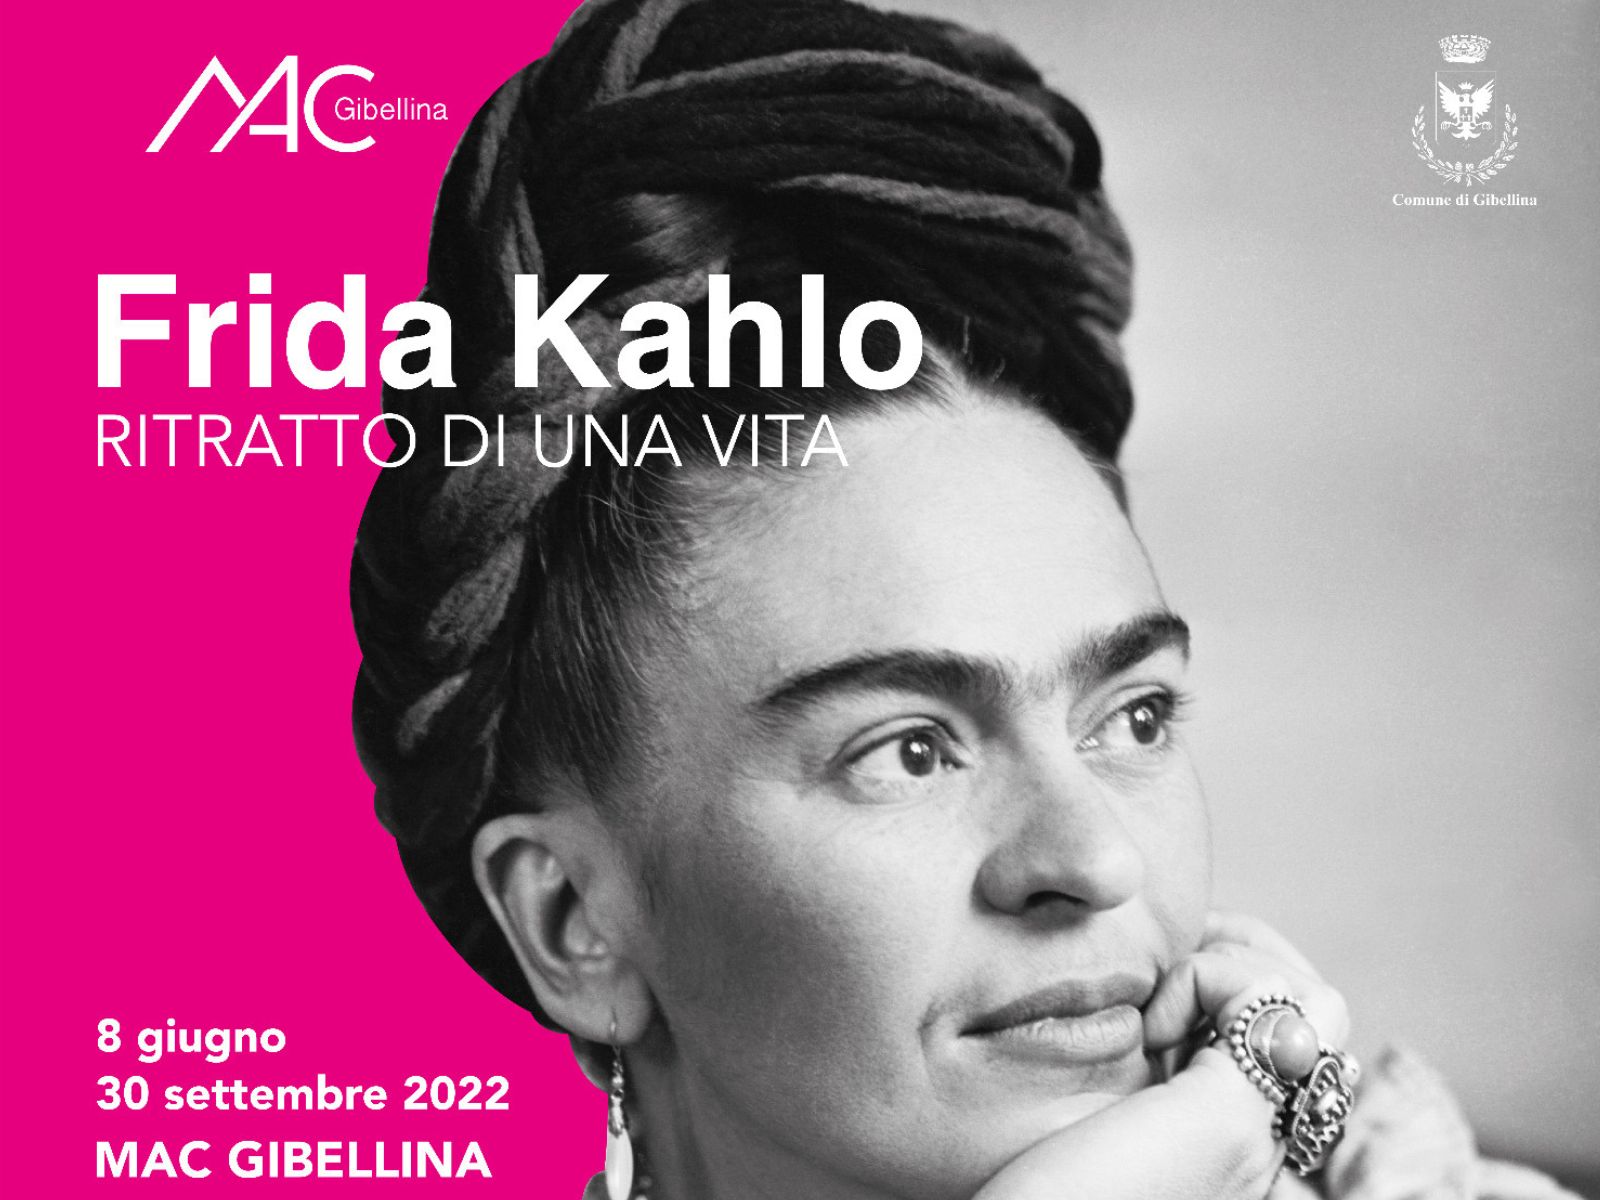 Frida Kahlo, portrait of a life: exhibition at the MAC in Gibellina